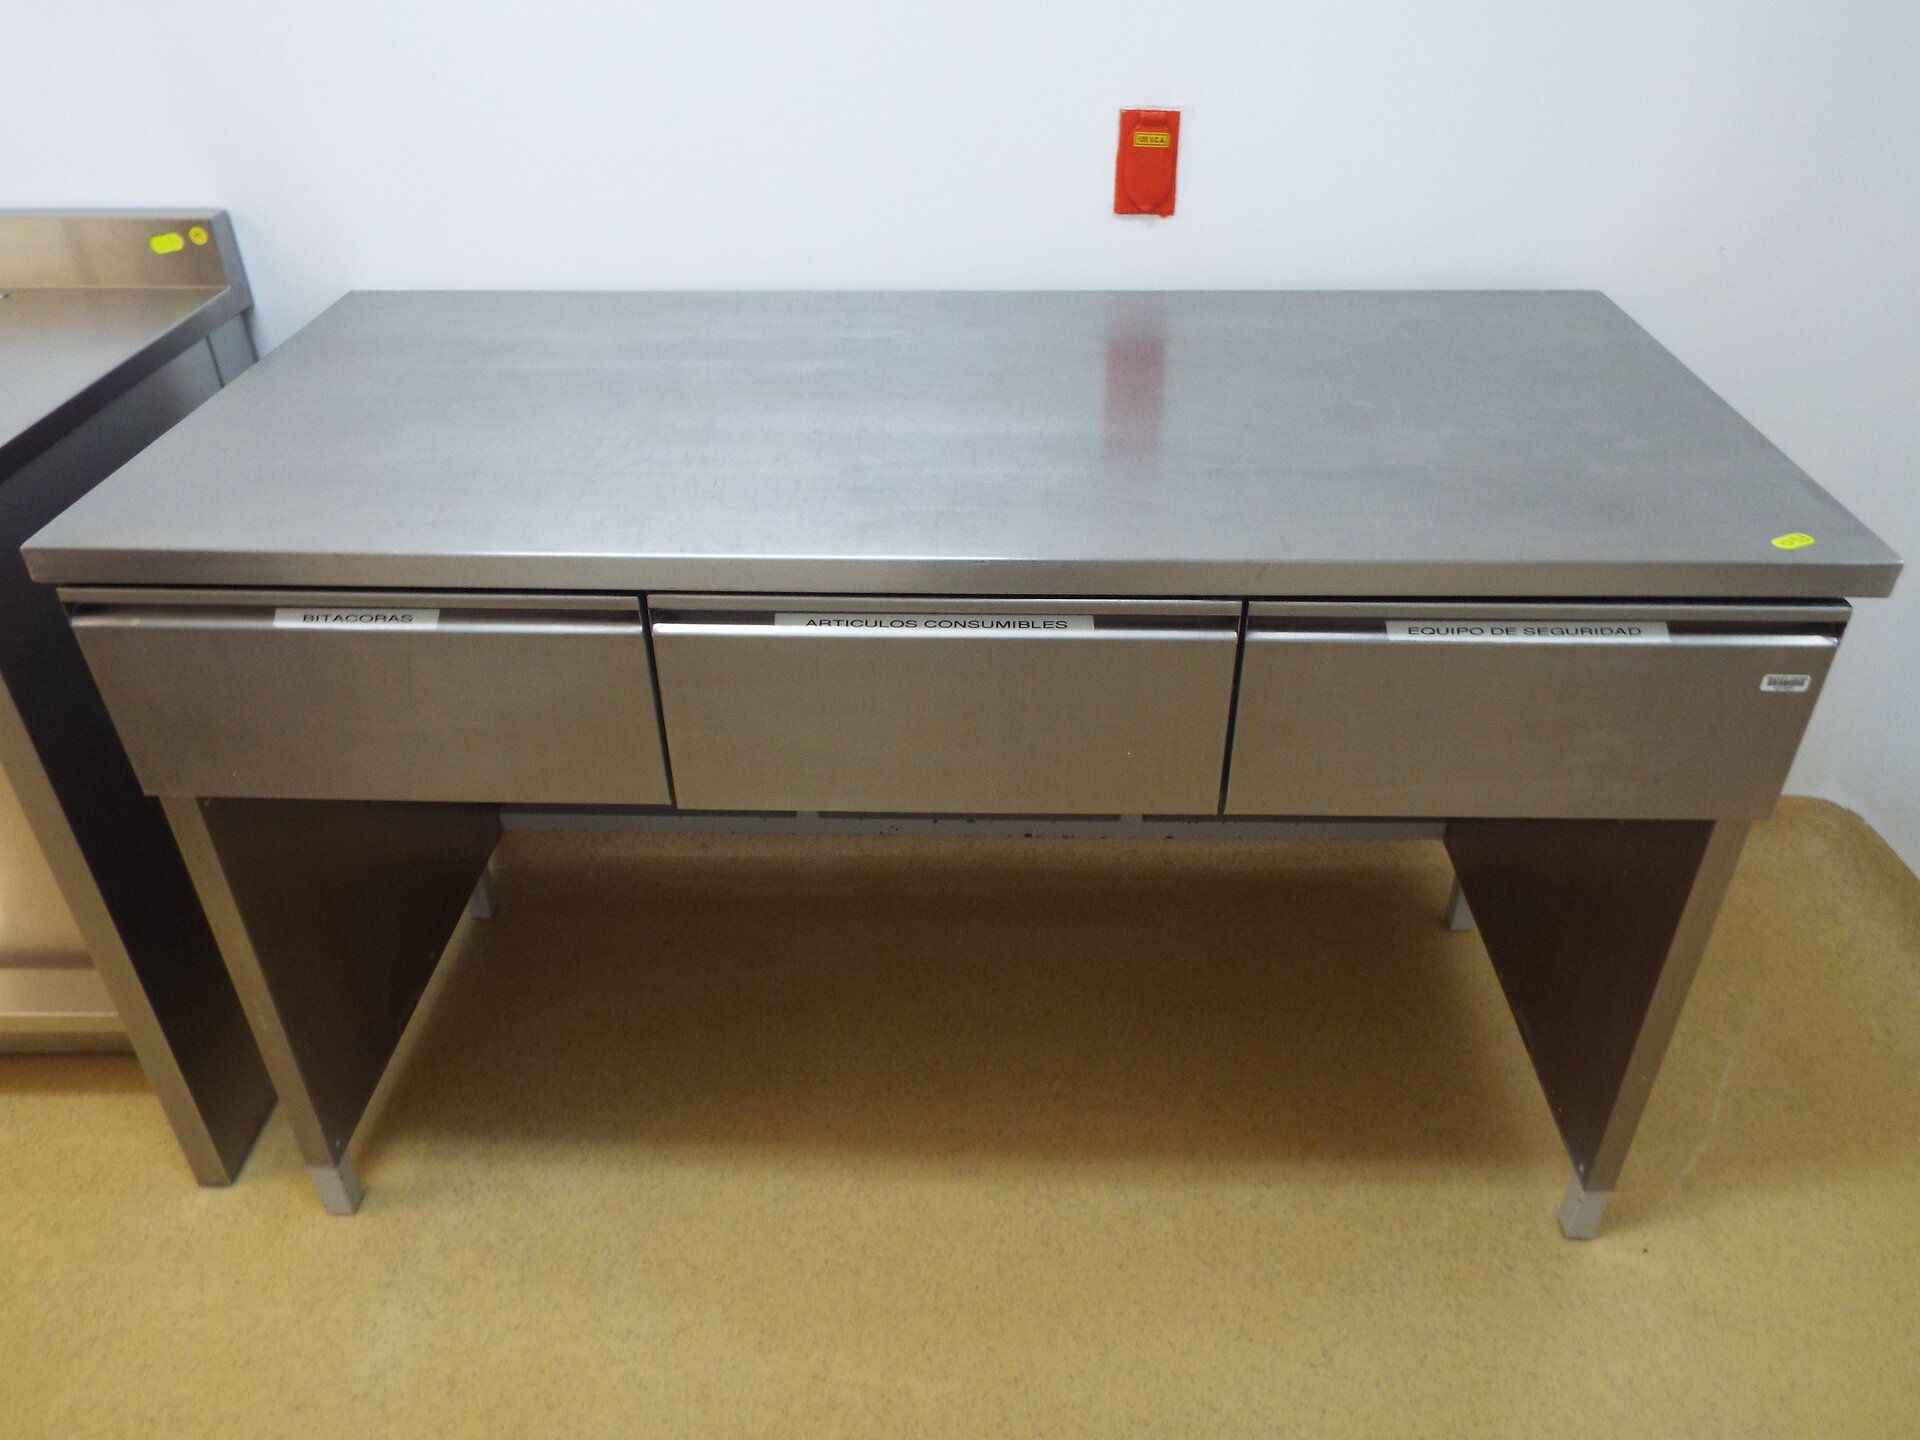 Stainless Steel table with 3 drawers